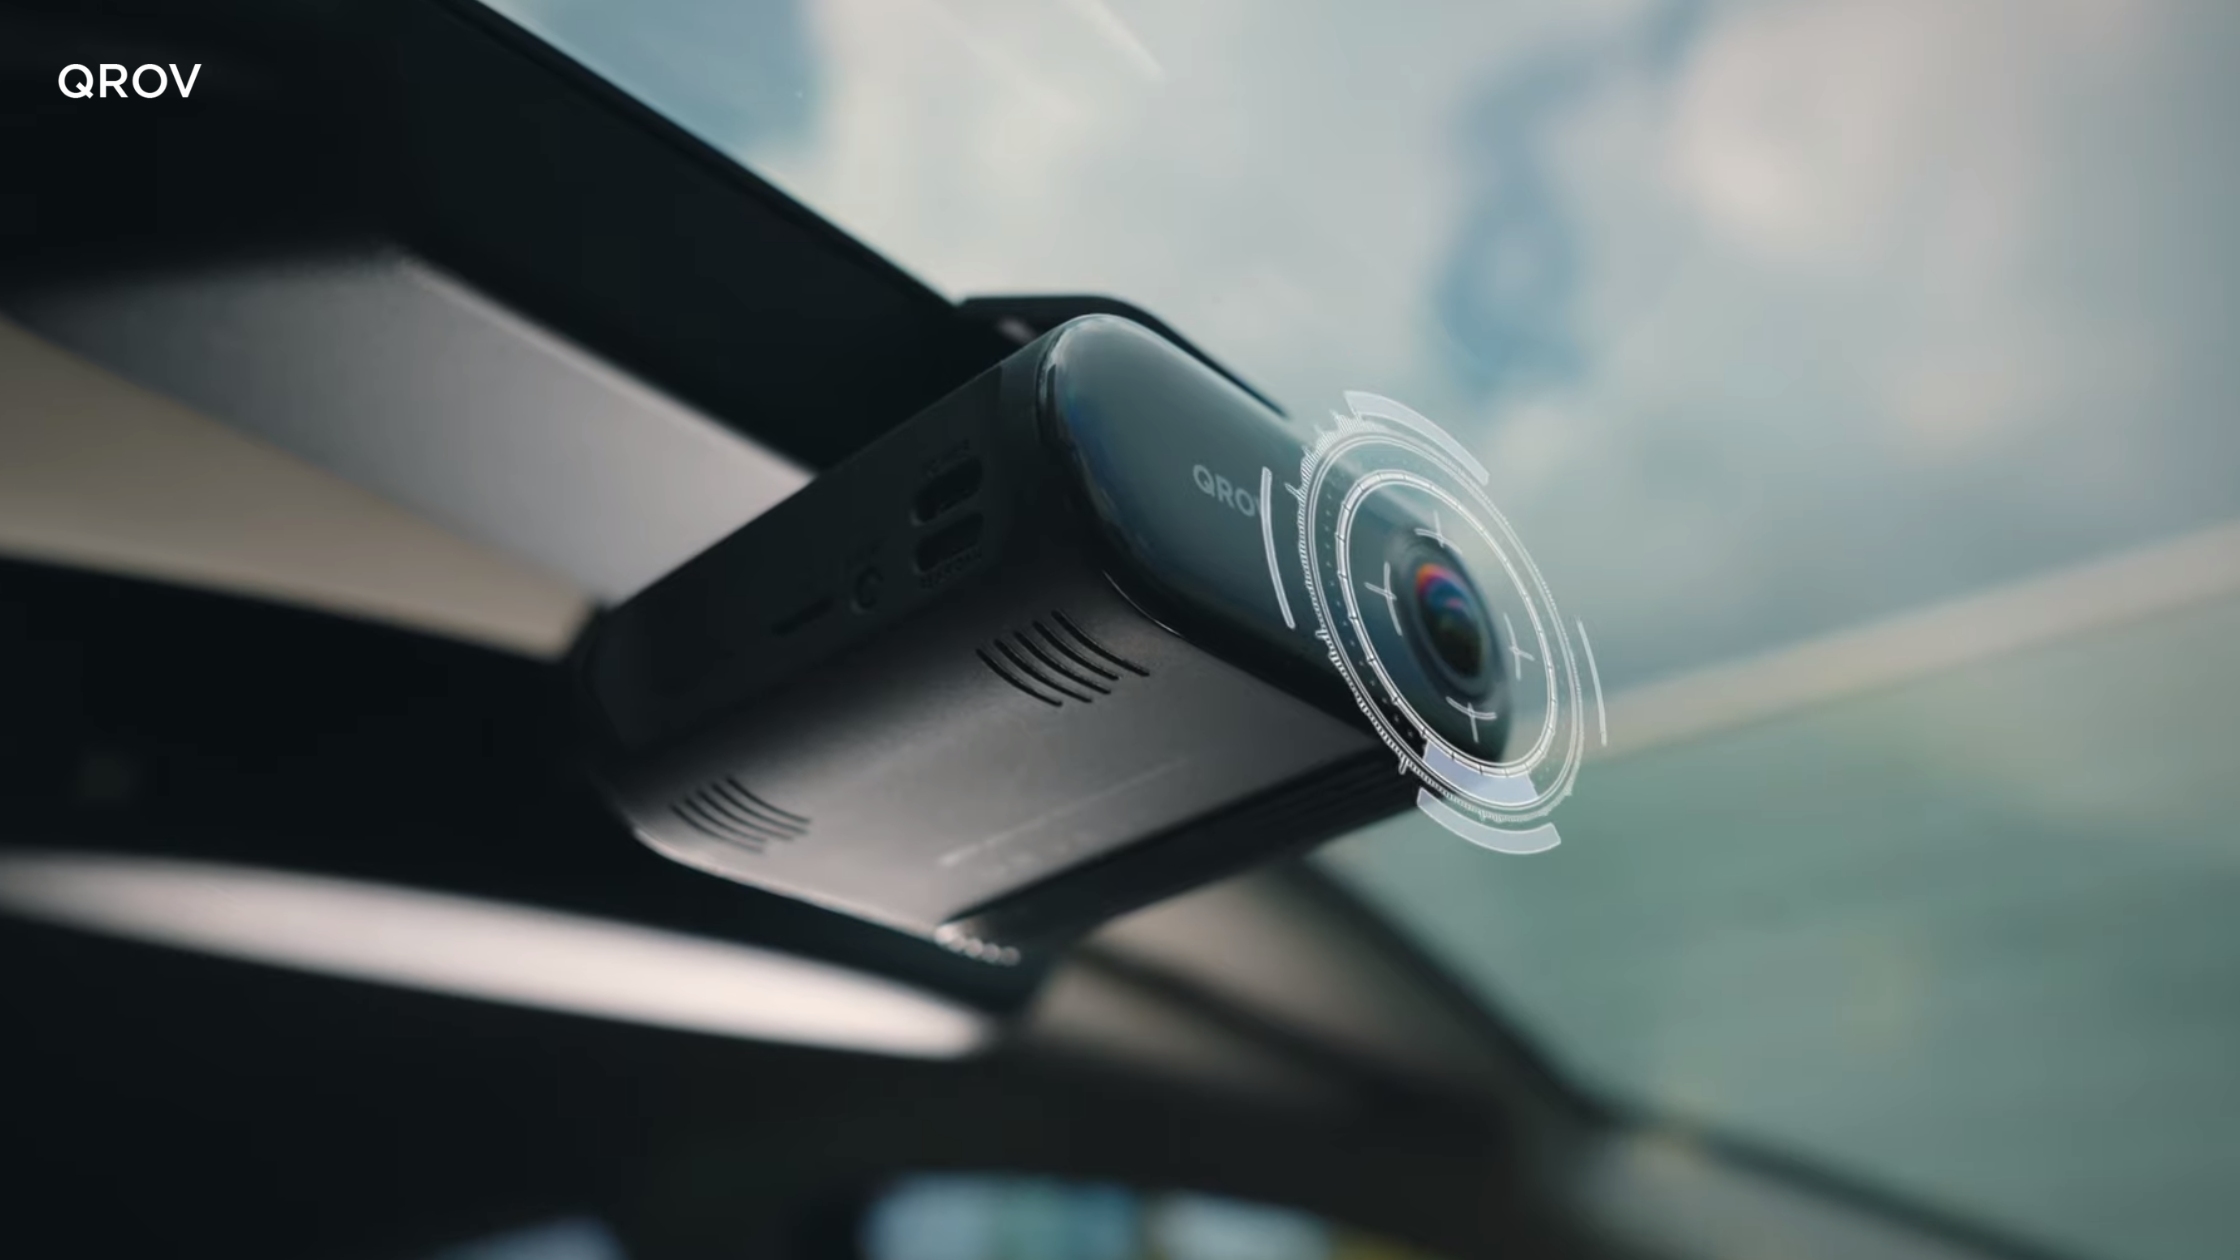 Parking Mode on Dashcams : All you need to know